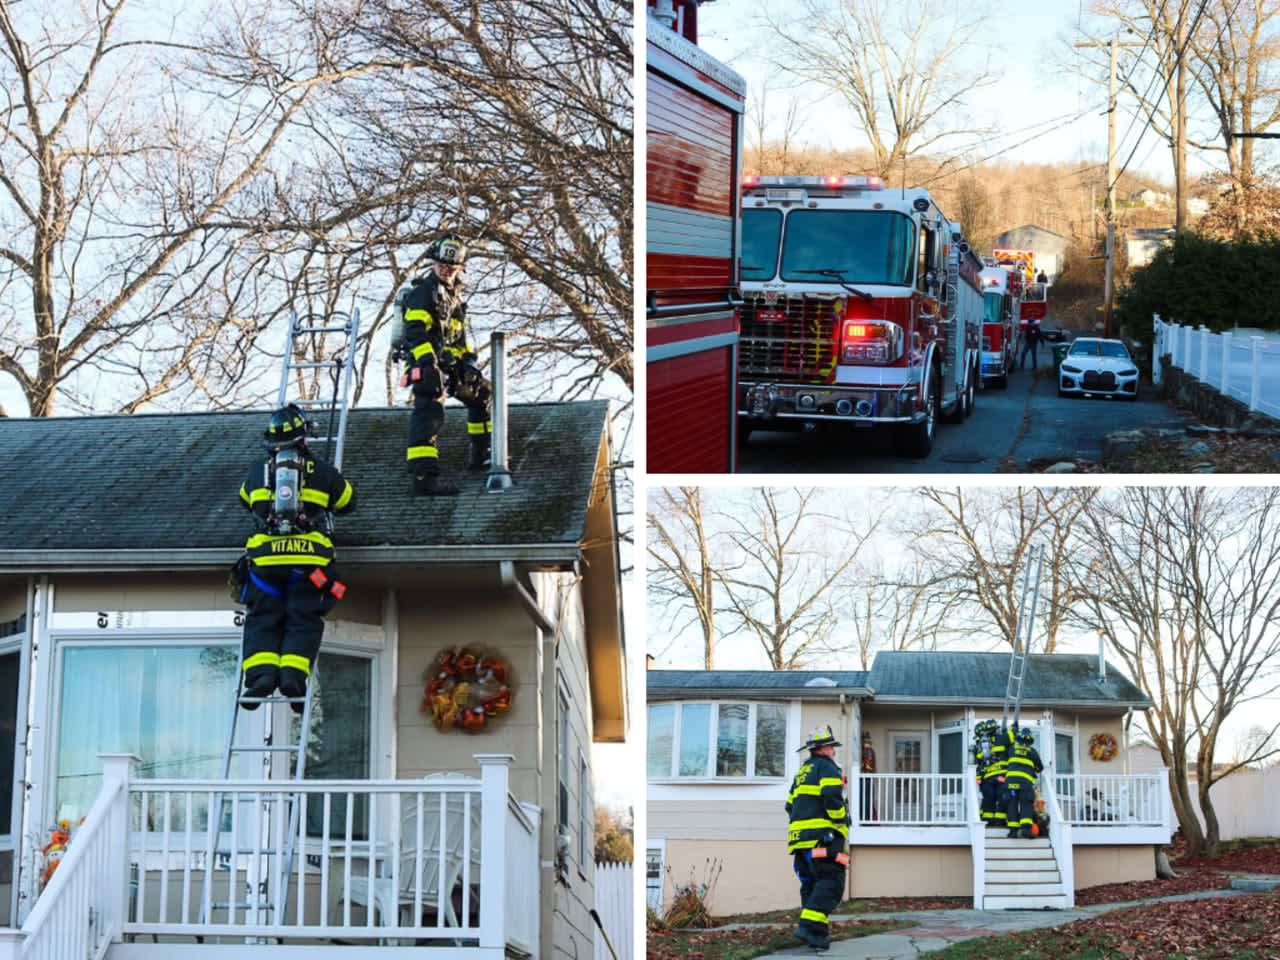 The chimney fire happened in Mahopac Falls on Willow Drive.